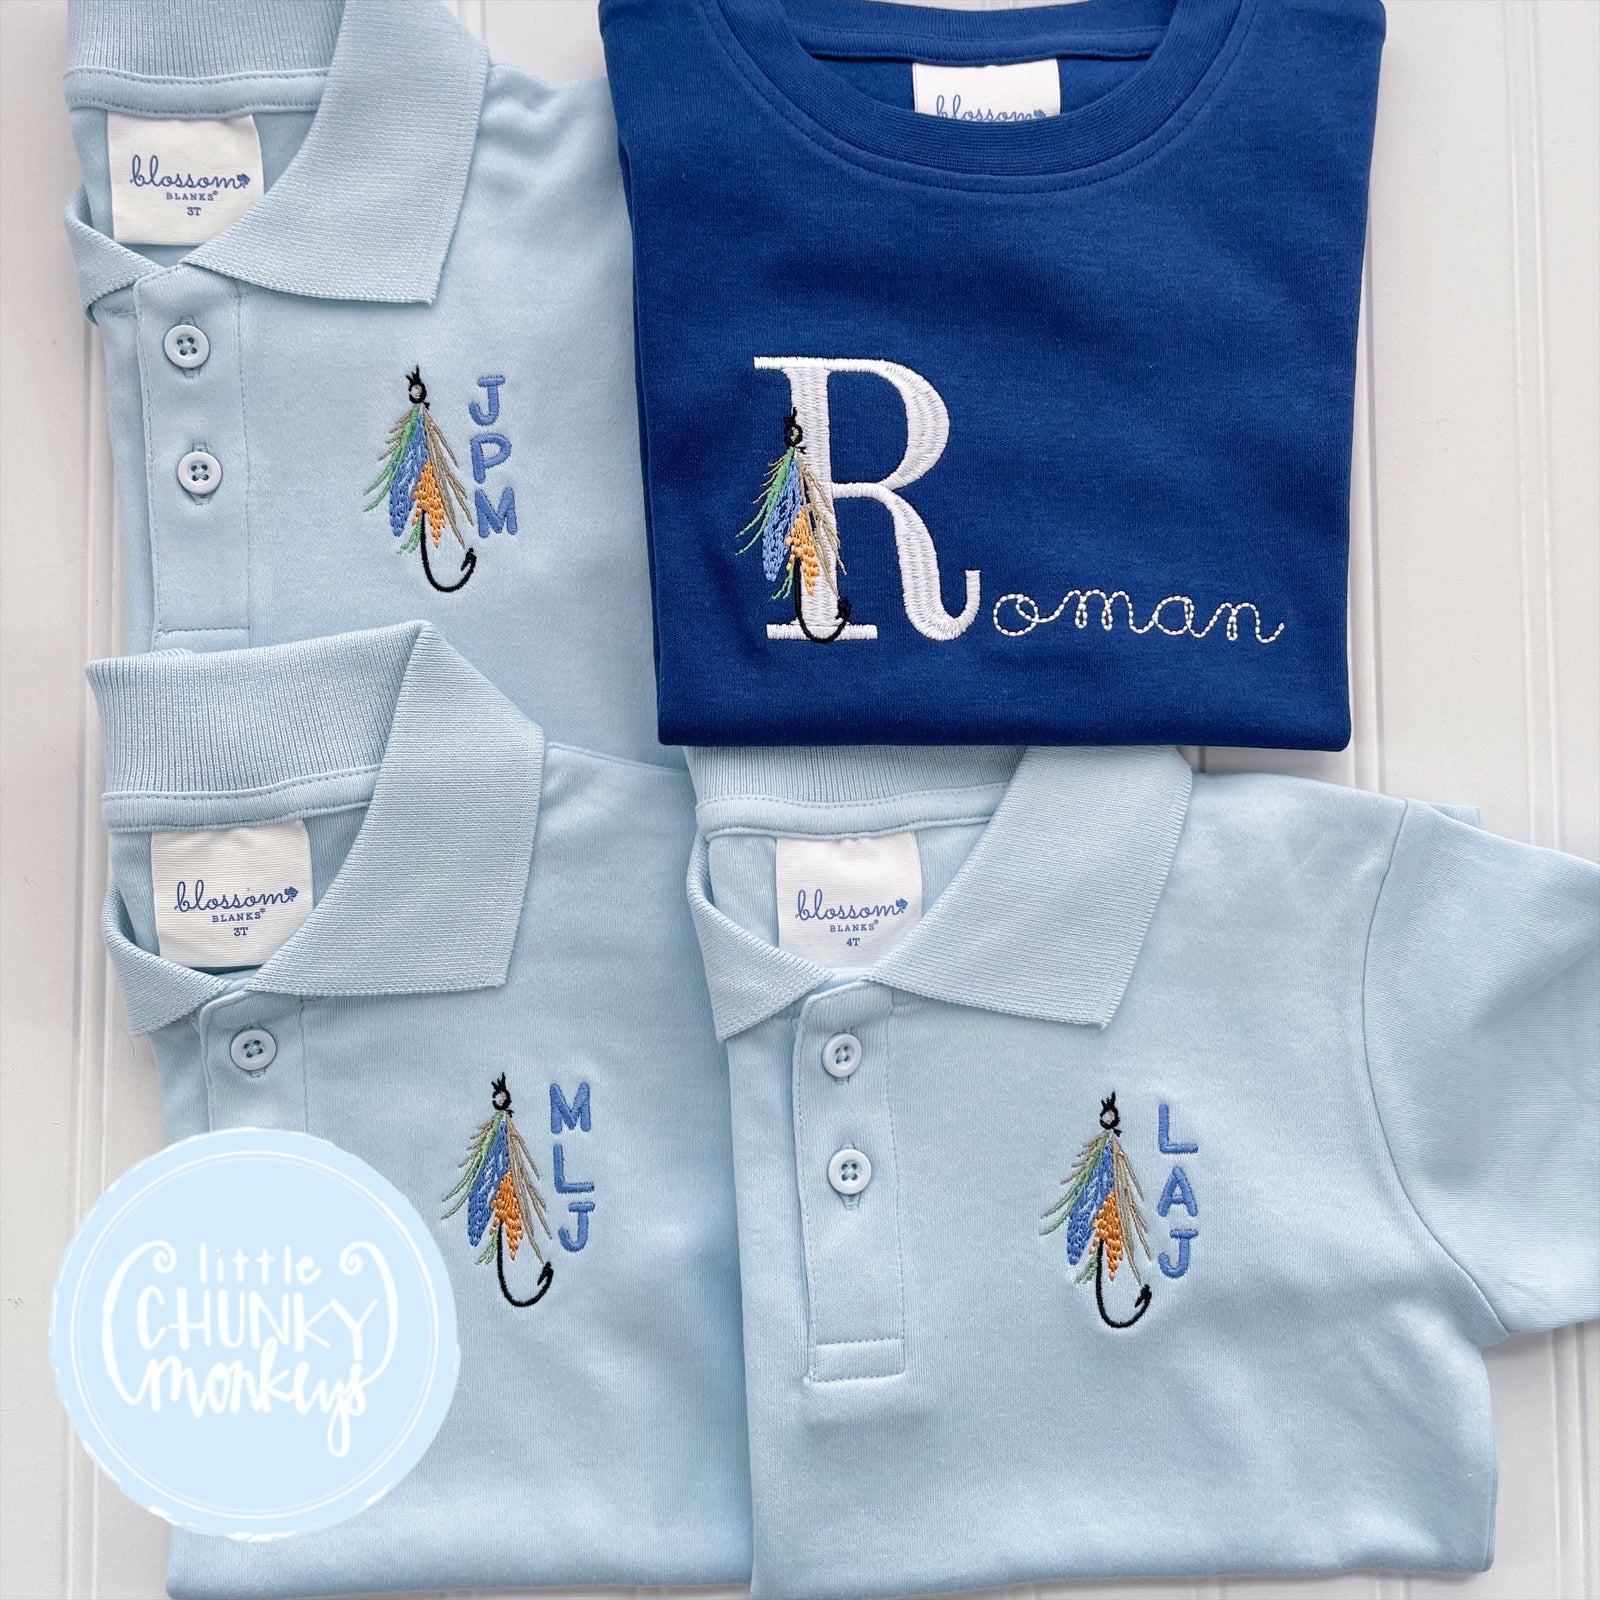 Boy Polo Shirt - Fly Fishing with Initial on Light Blue – Little Chunky  Monkeys